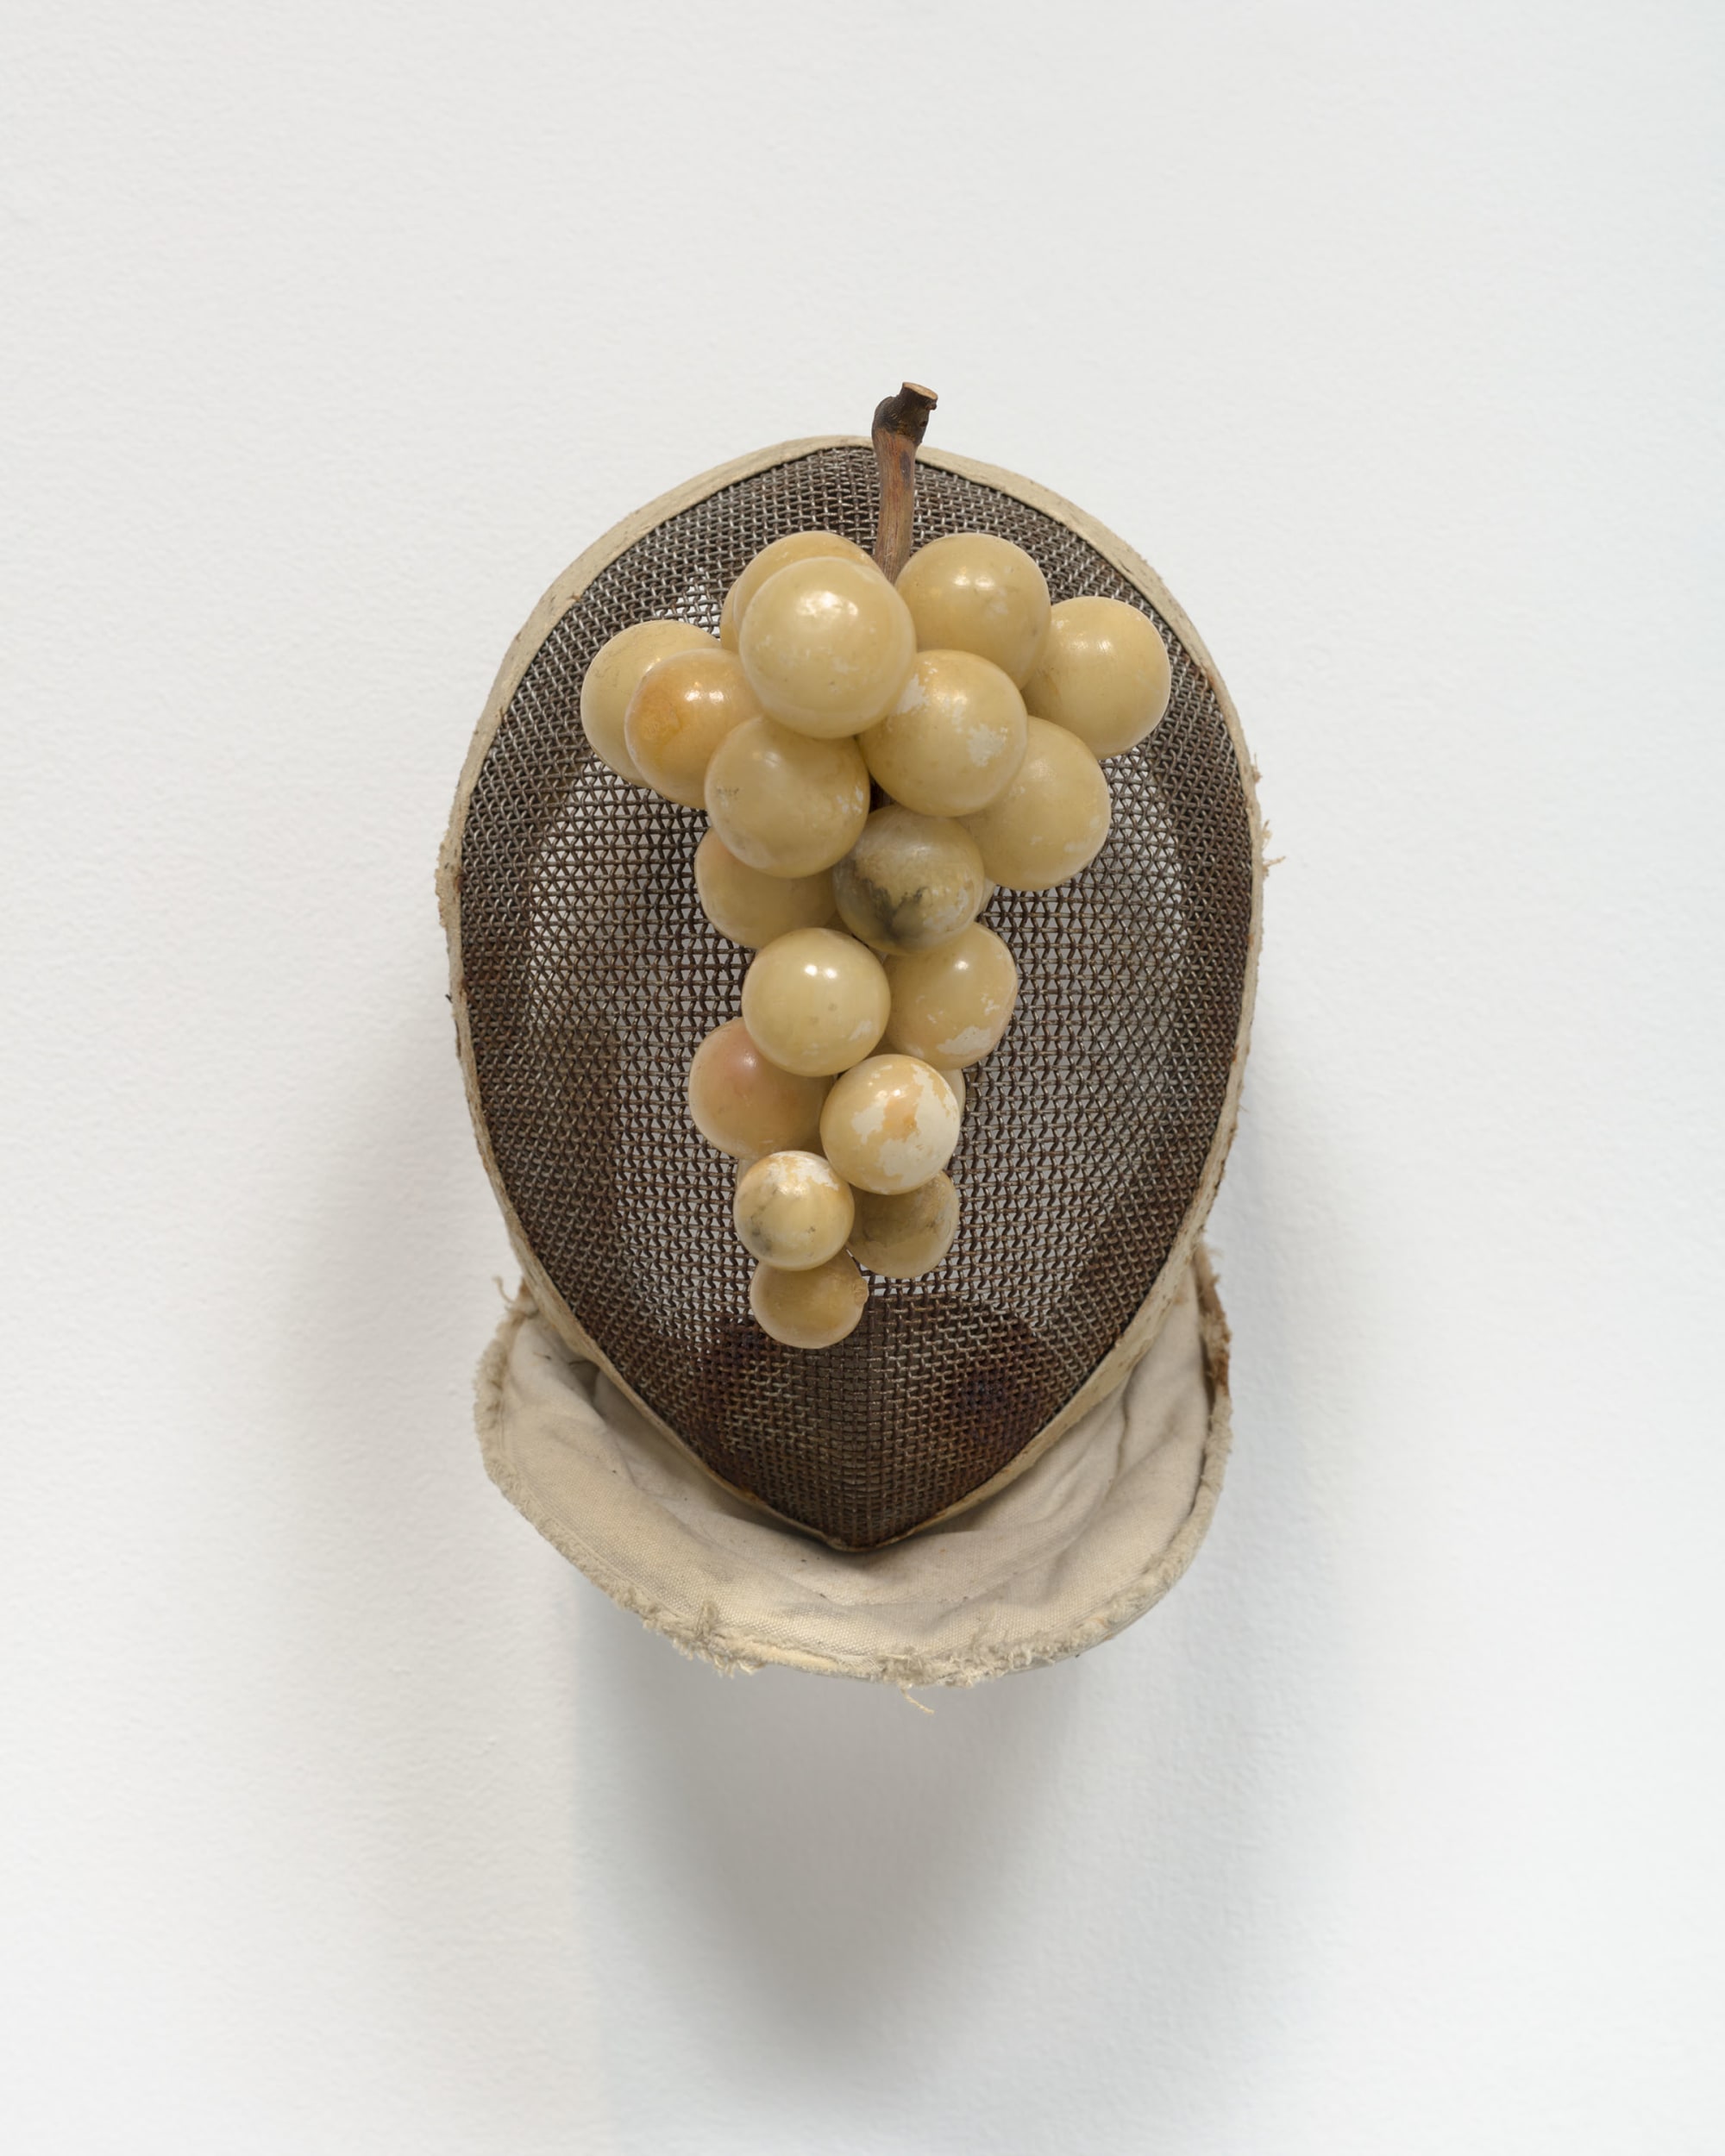 Fencing mask with alabaster grapes